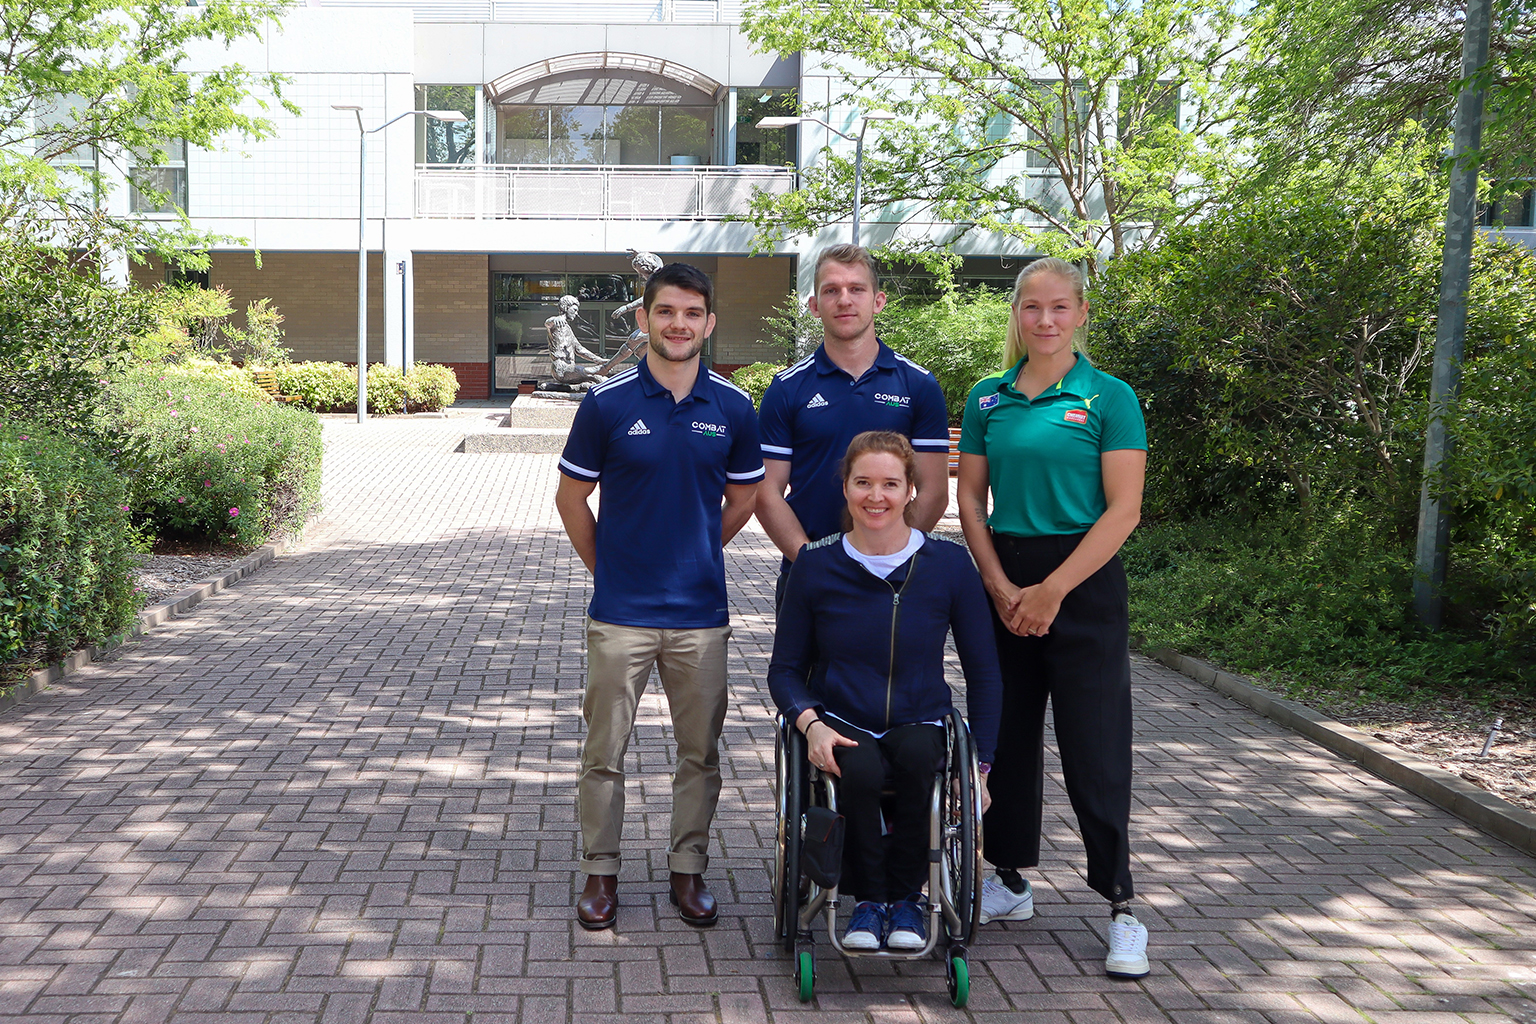 Three athletes standing and one athlete in a wheelchair gathered outside at the AIS.